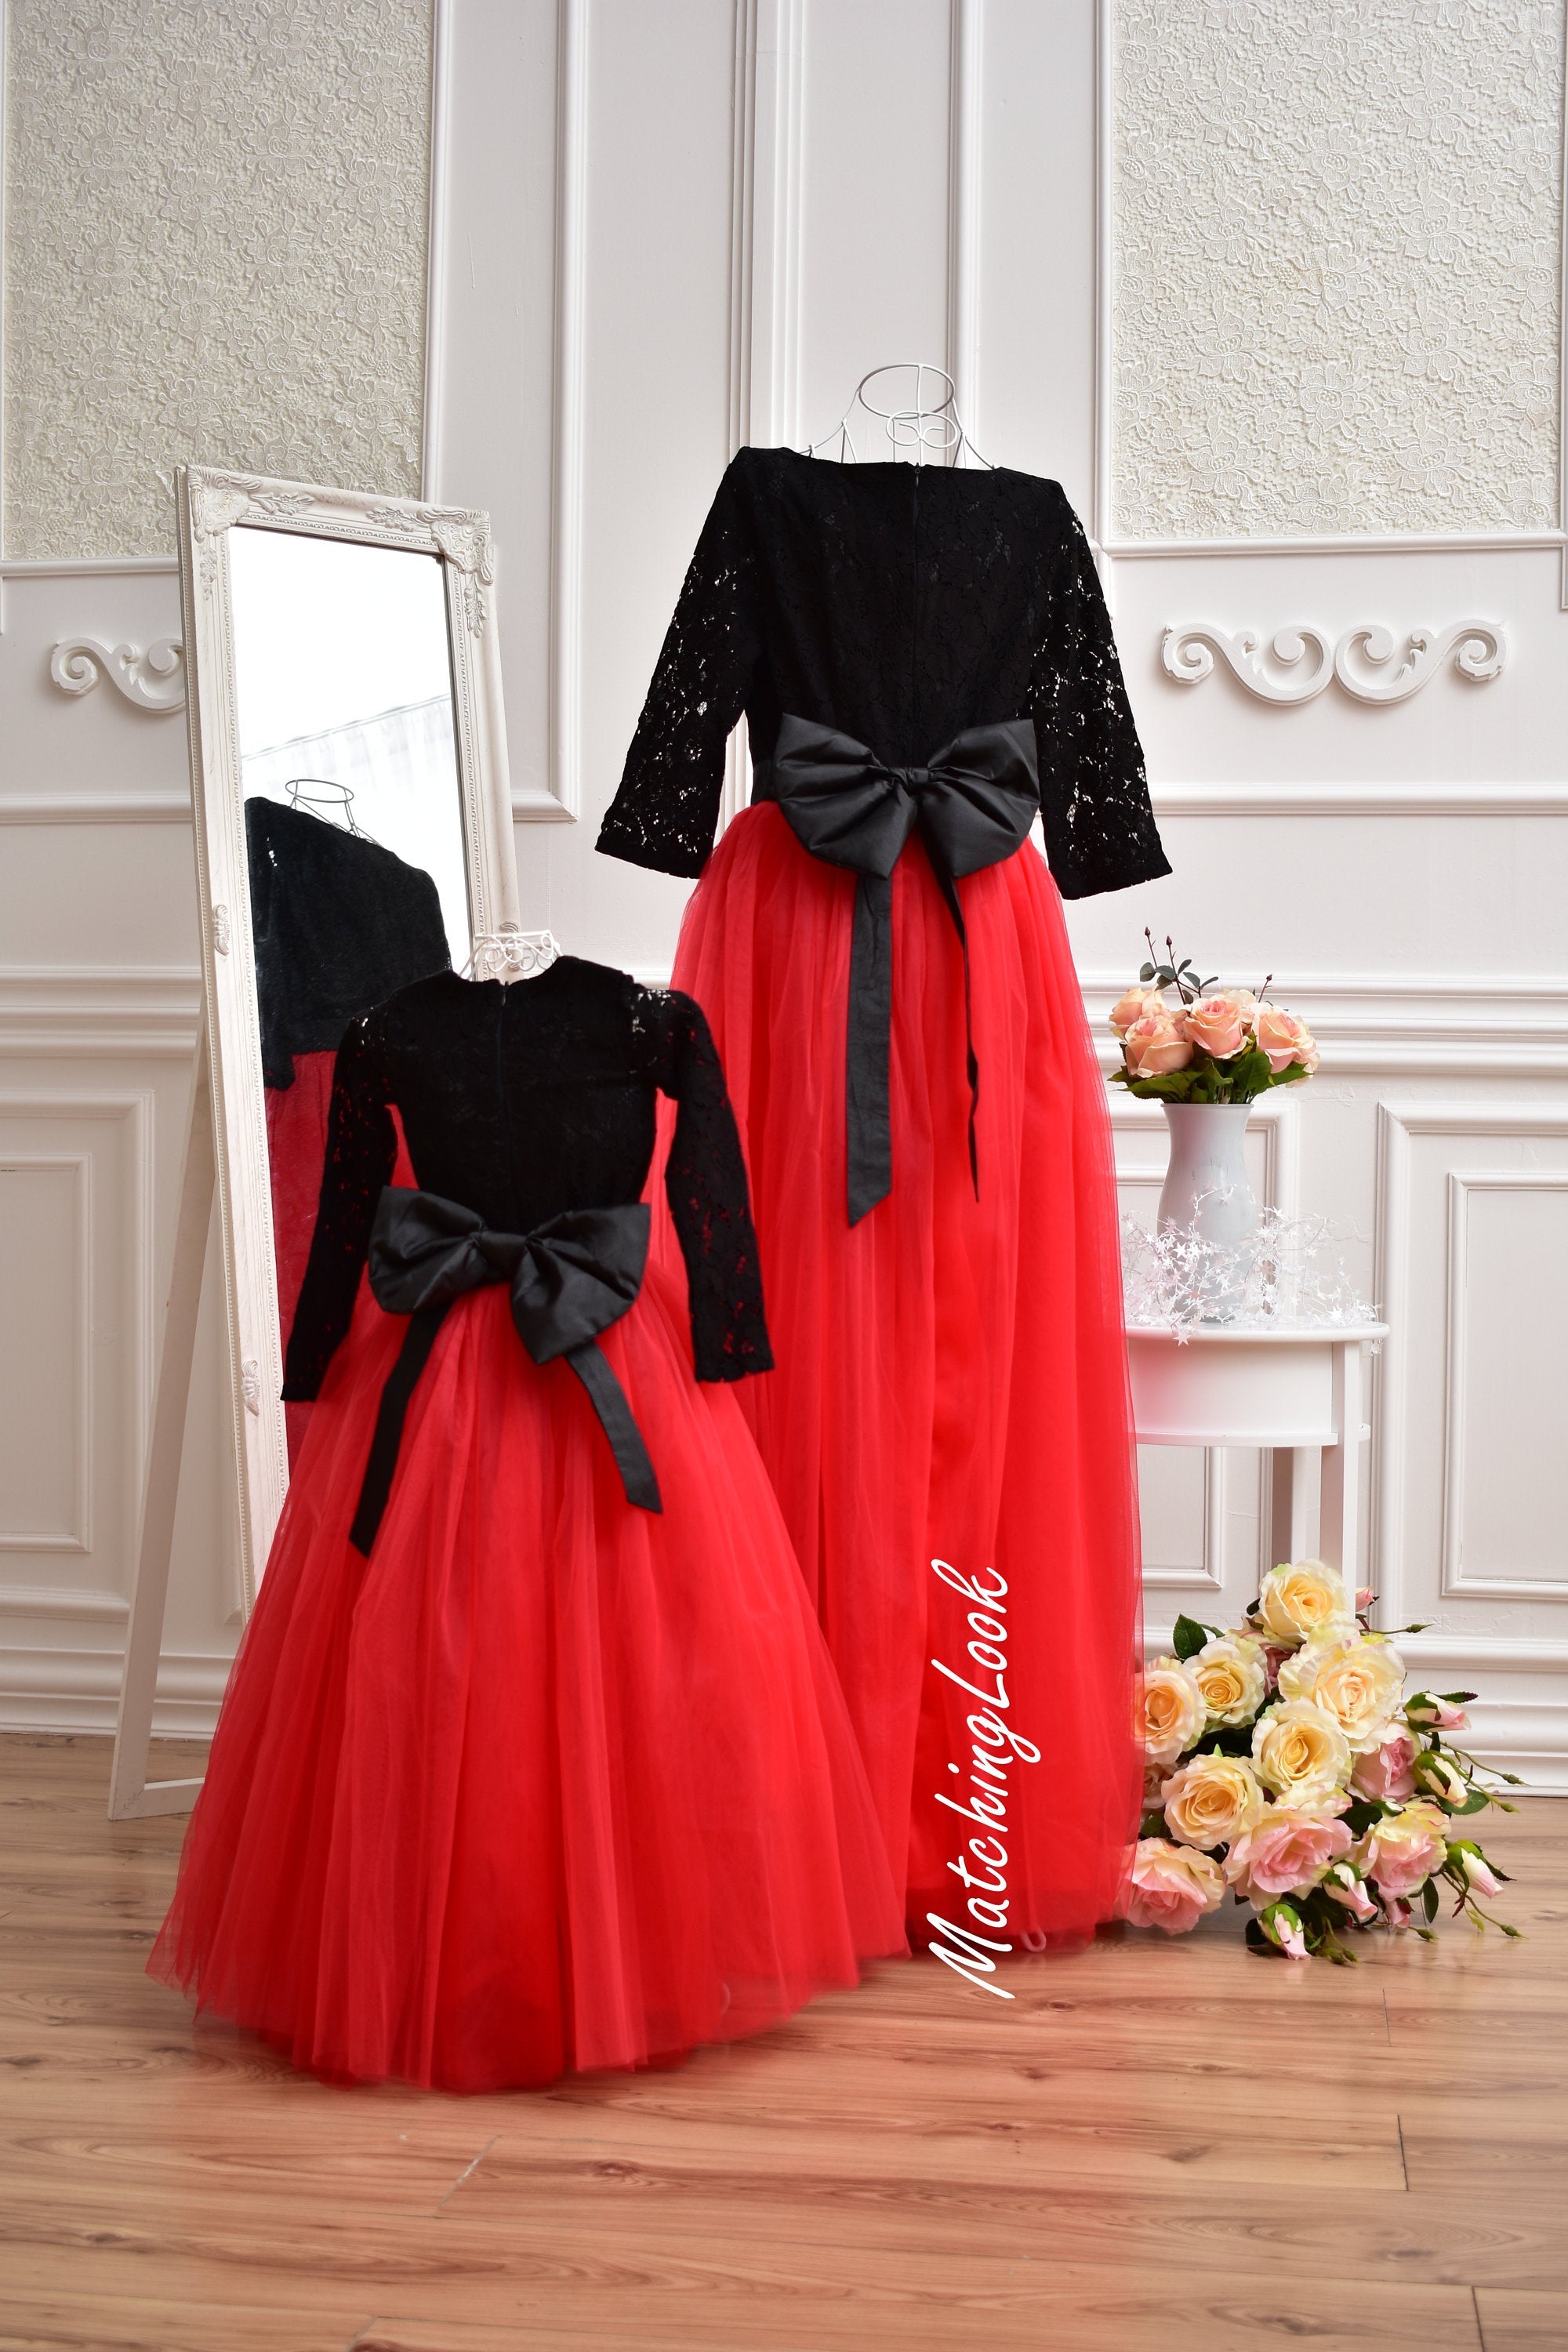 Black Ball Gown Flower Girl Dresses Little Girls Party Dress Black Pageant  Gowns